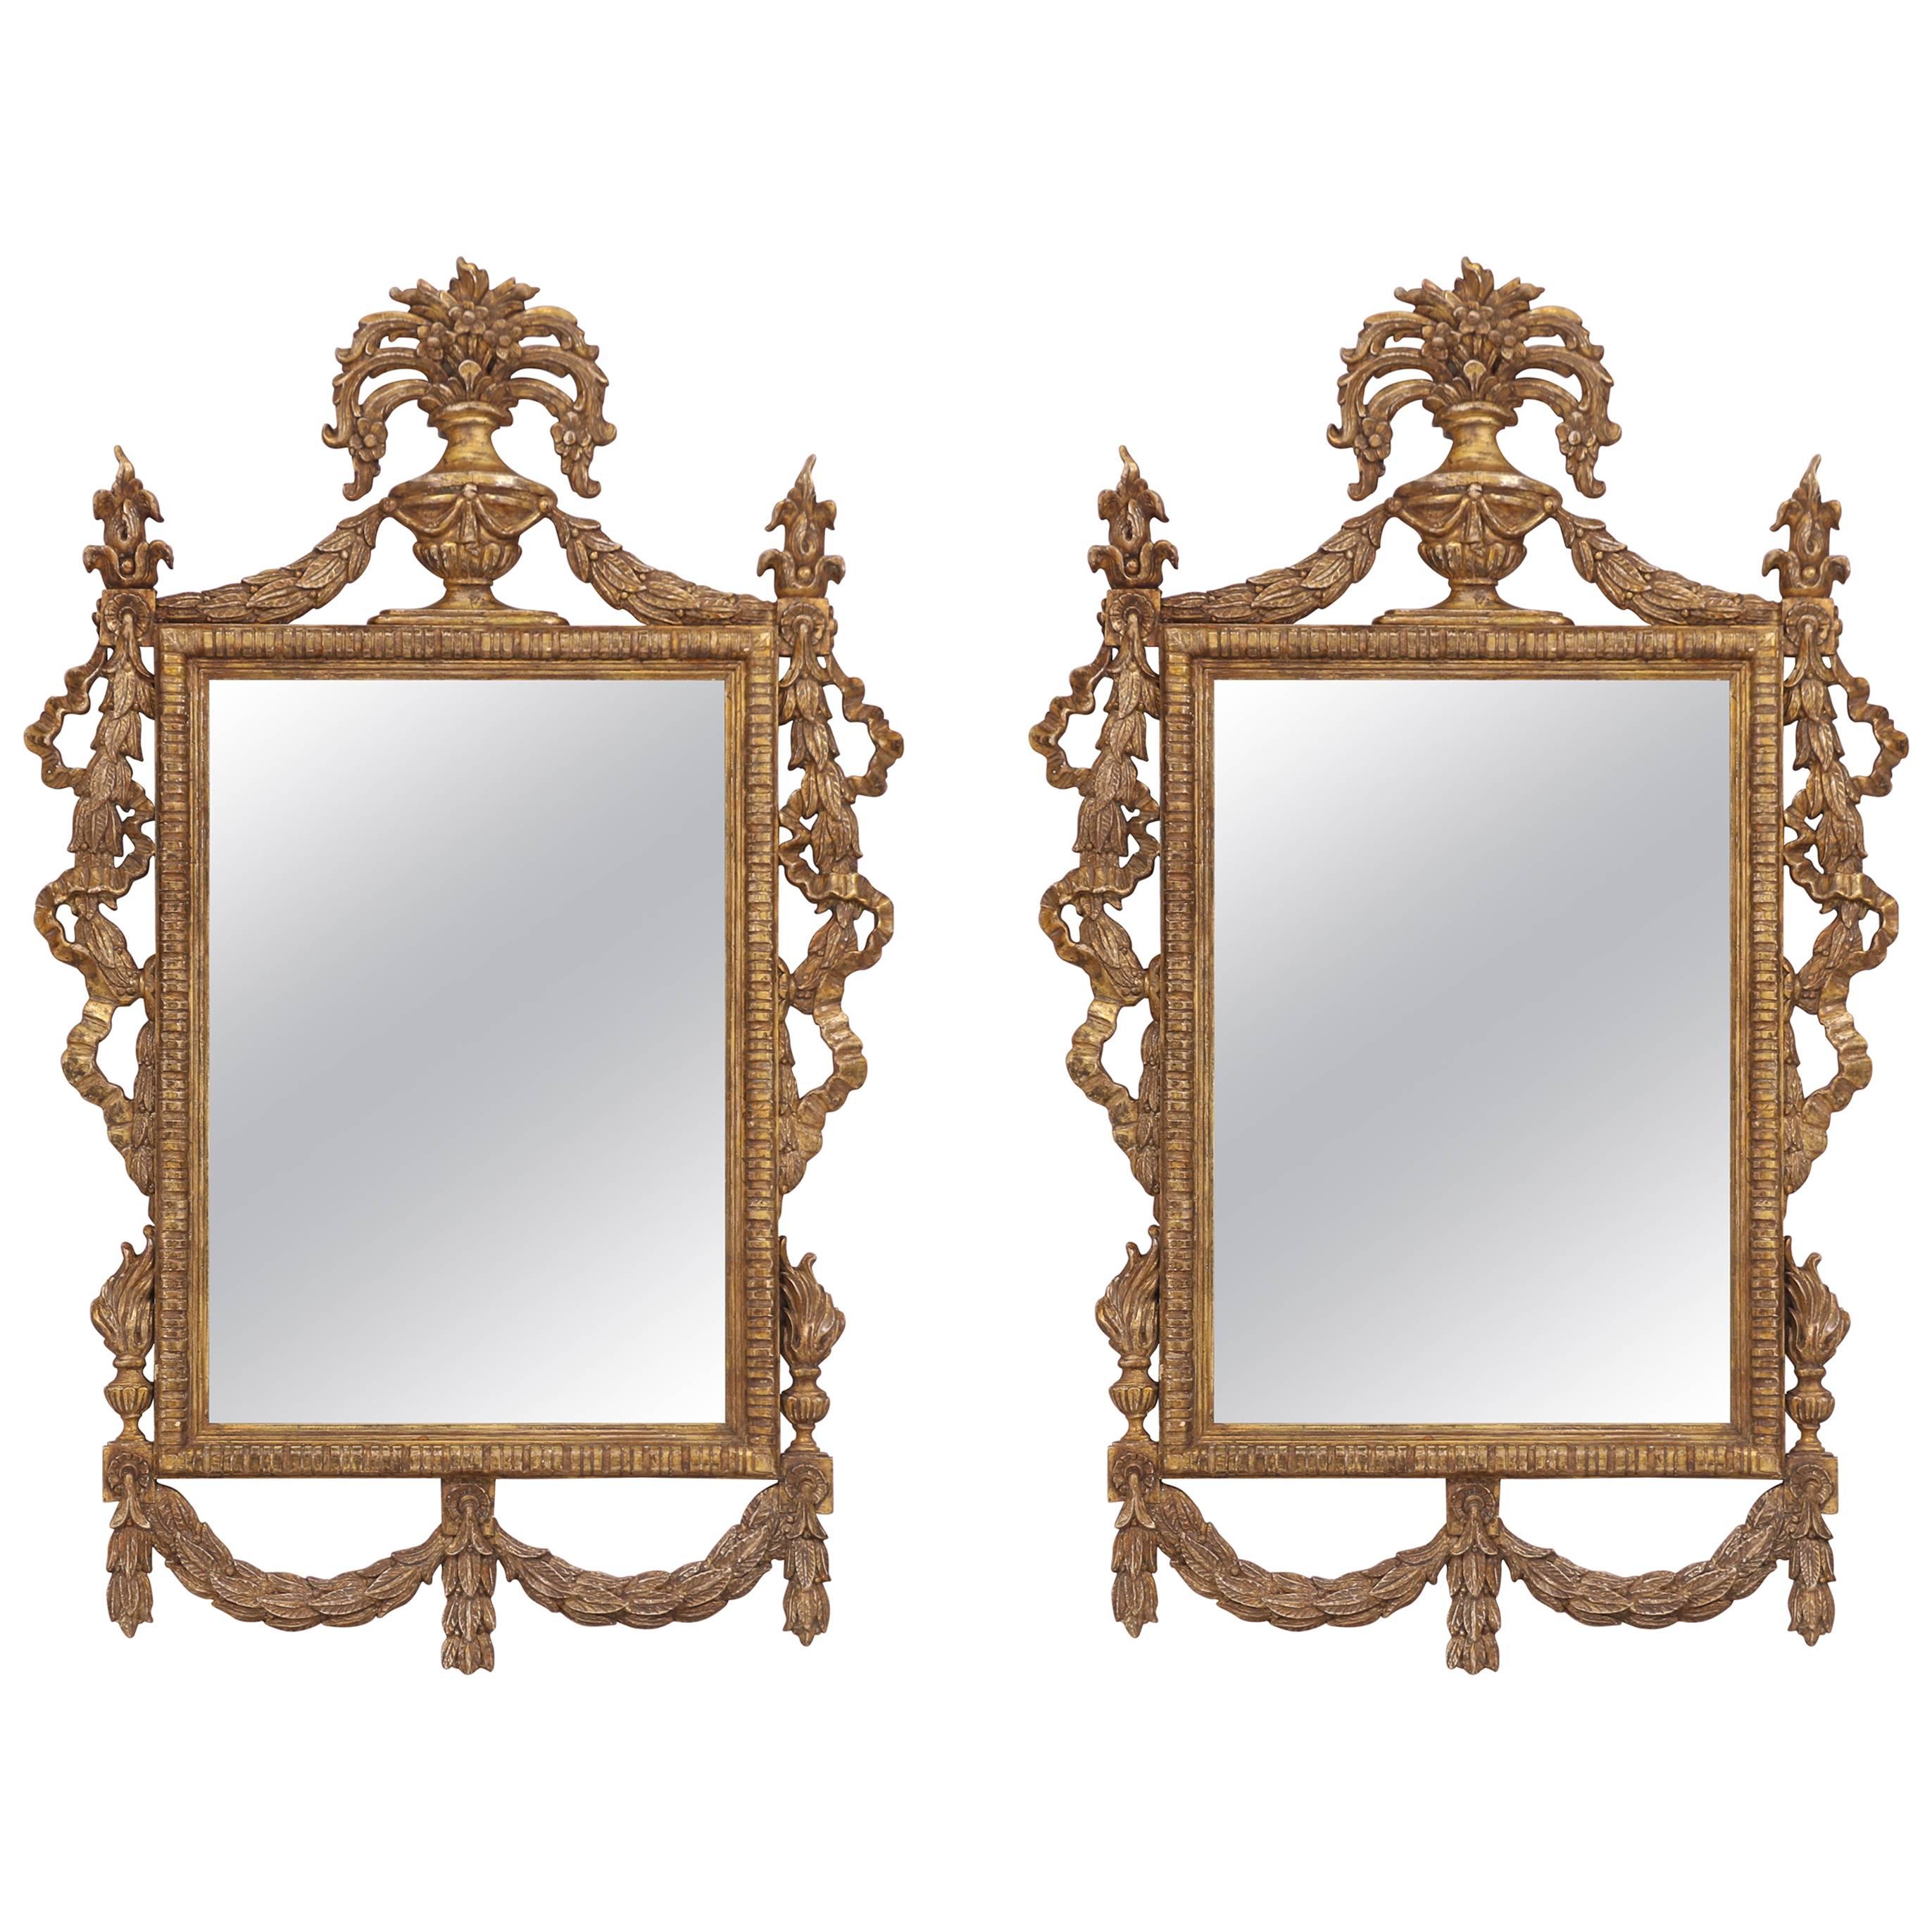 Monumental Pair of Neoclassical Gilt Wood Mirrors